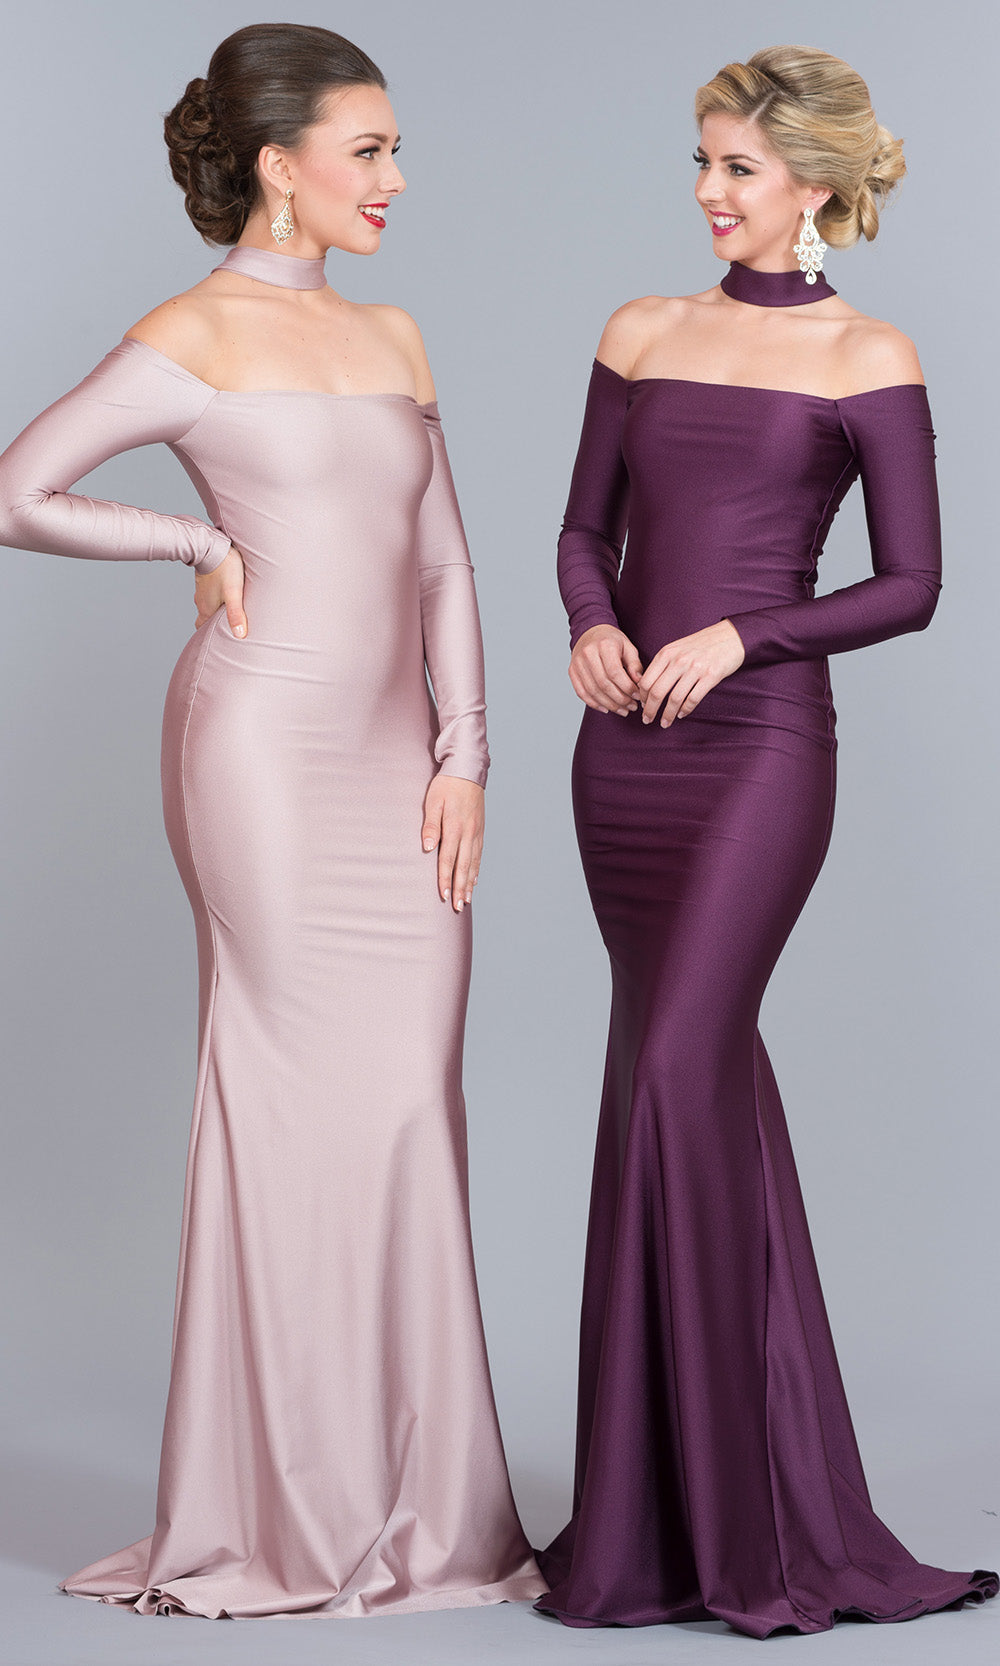 Atria - 5948H Long Sleeve Choker Style Gown In Purple and Pink